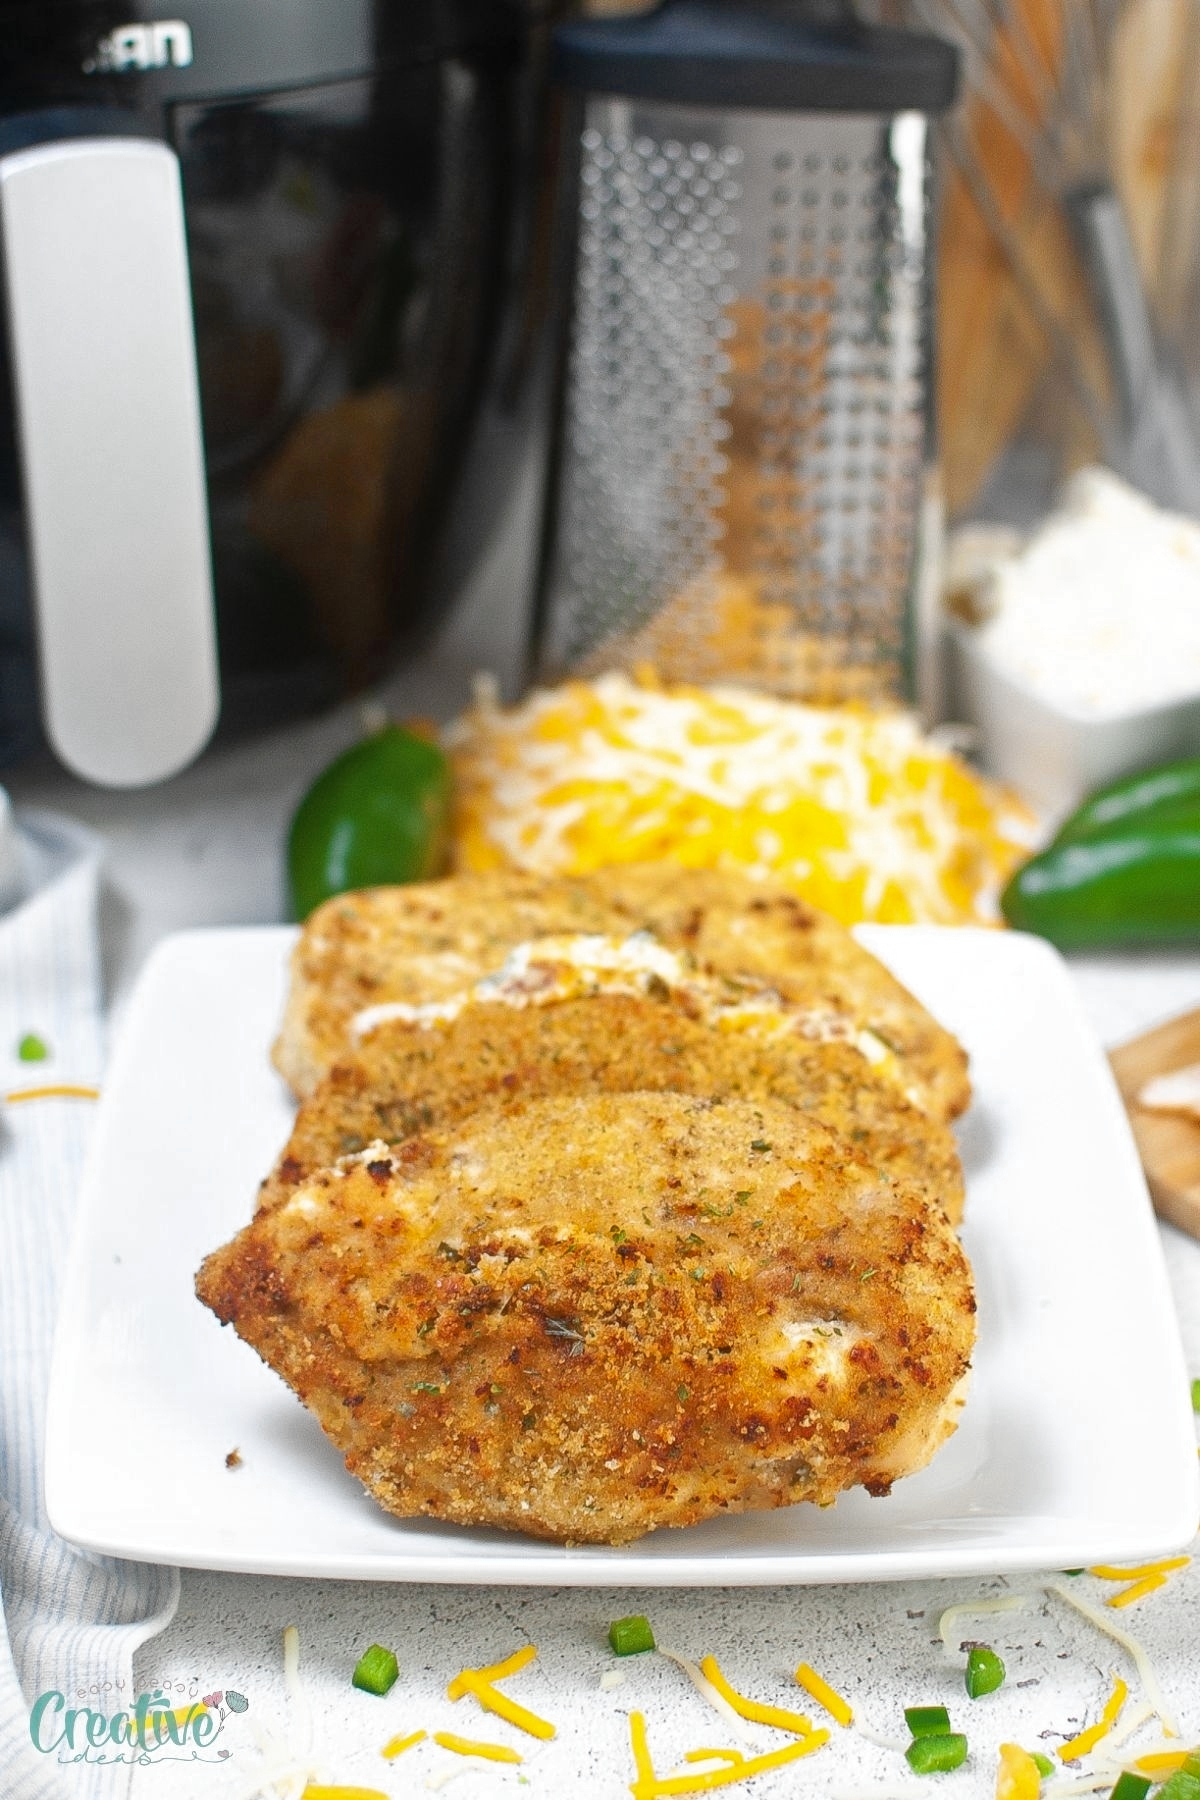 Jalapeno popper stuffed chicken is a delicious and easy-to-make dish that combines the flavors of creamy cheese, spicy jalapenos, and crispy bacon.